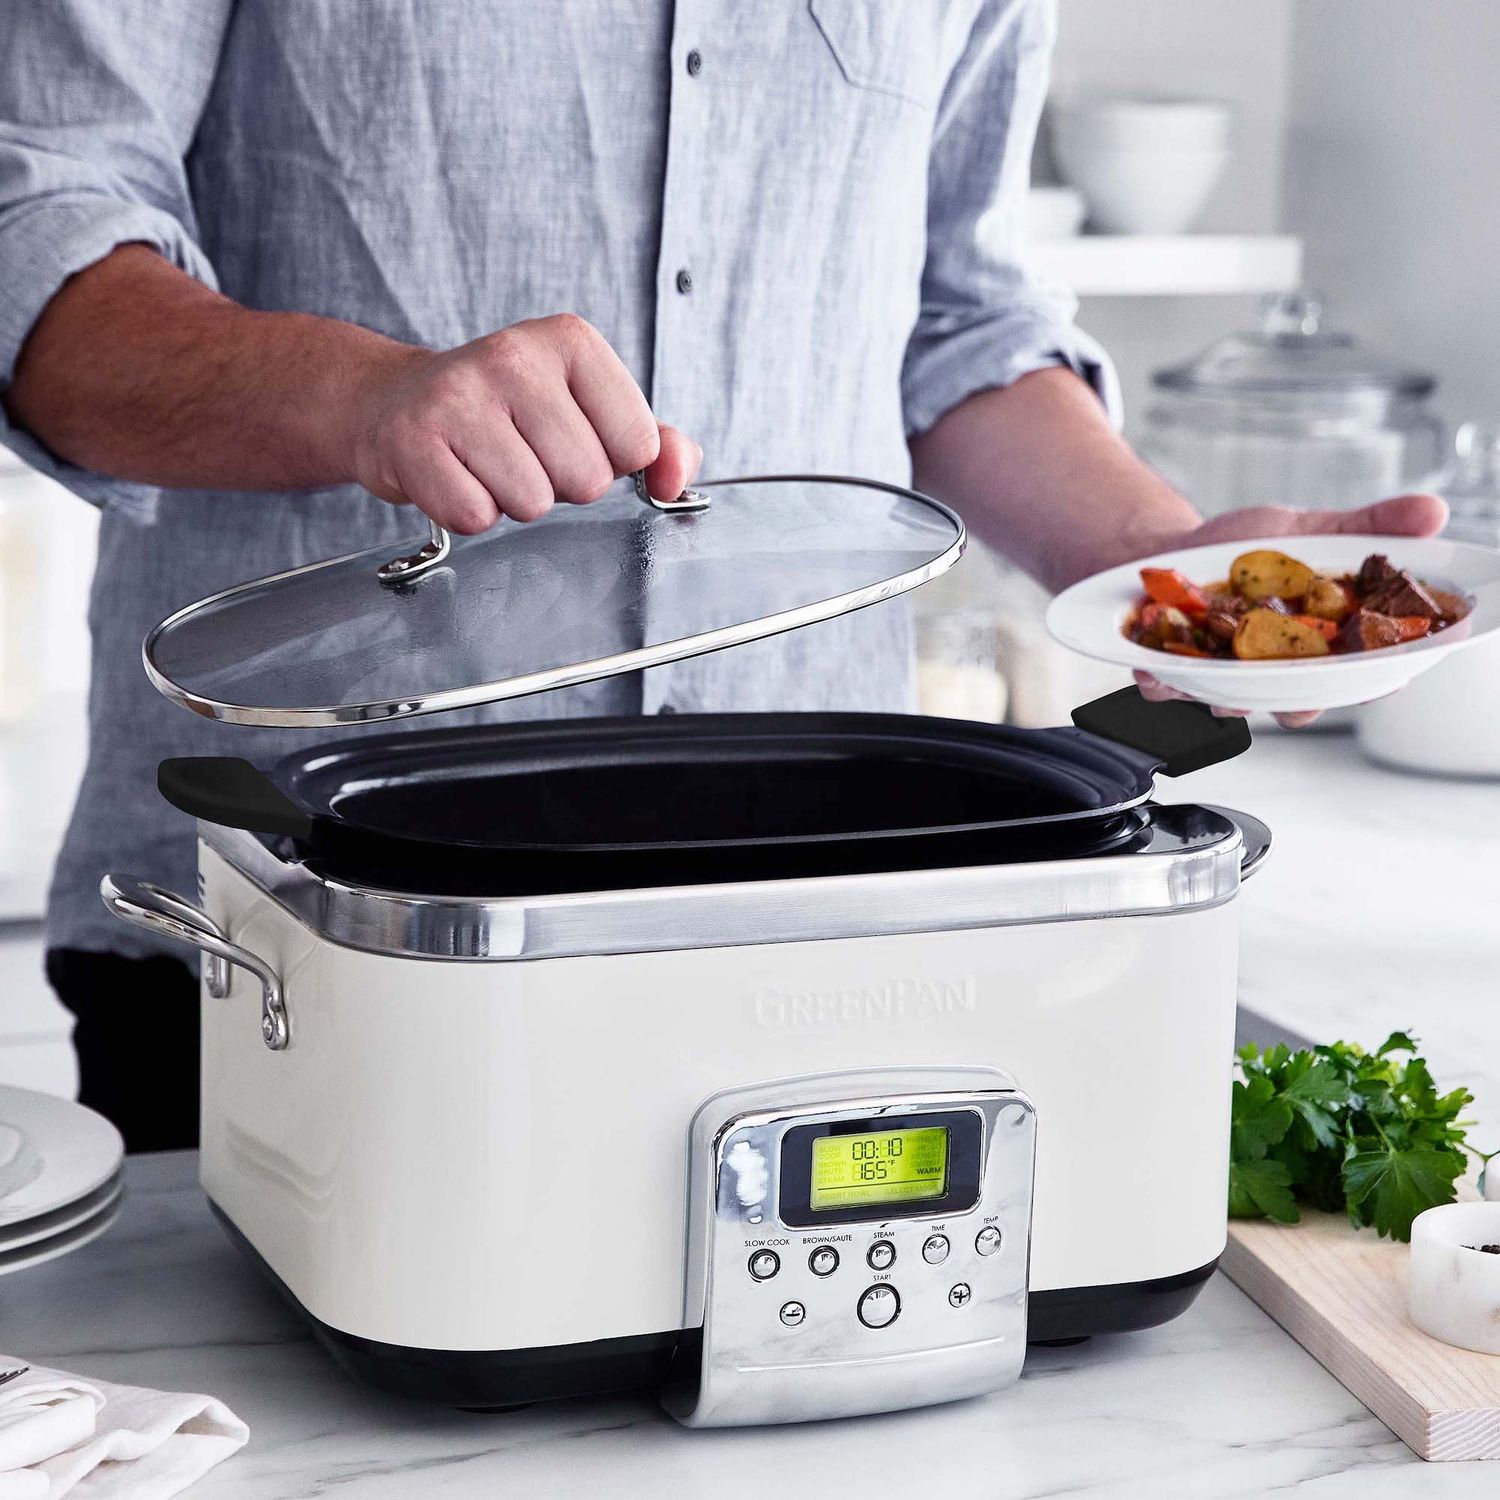 All-Clad Stainless Steel & Glass Slow Cookers